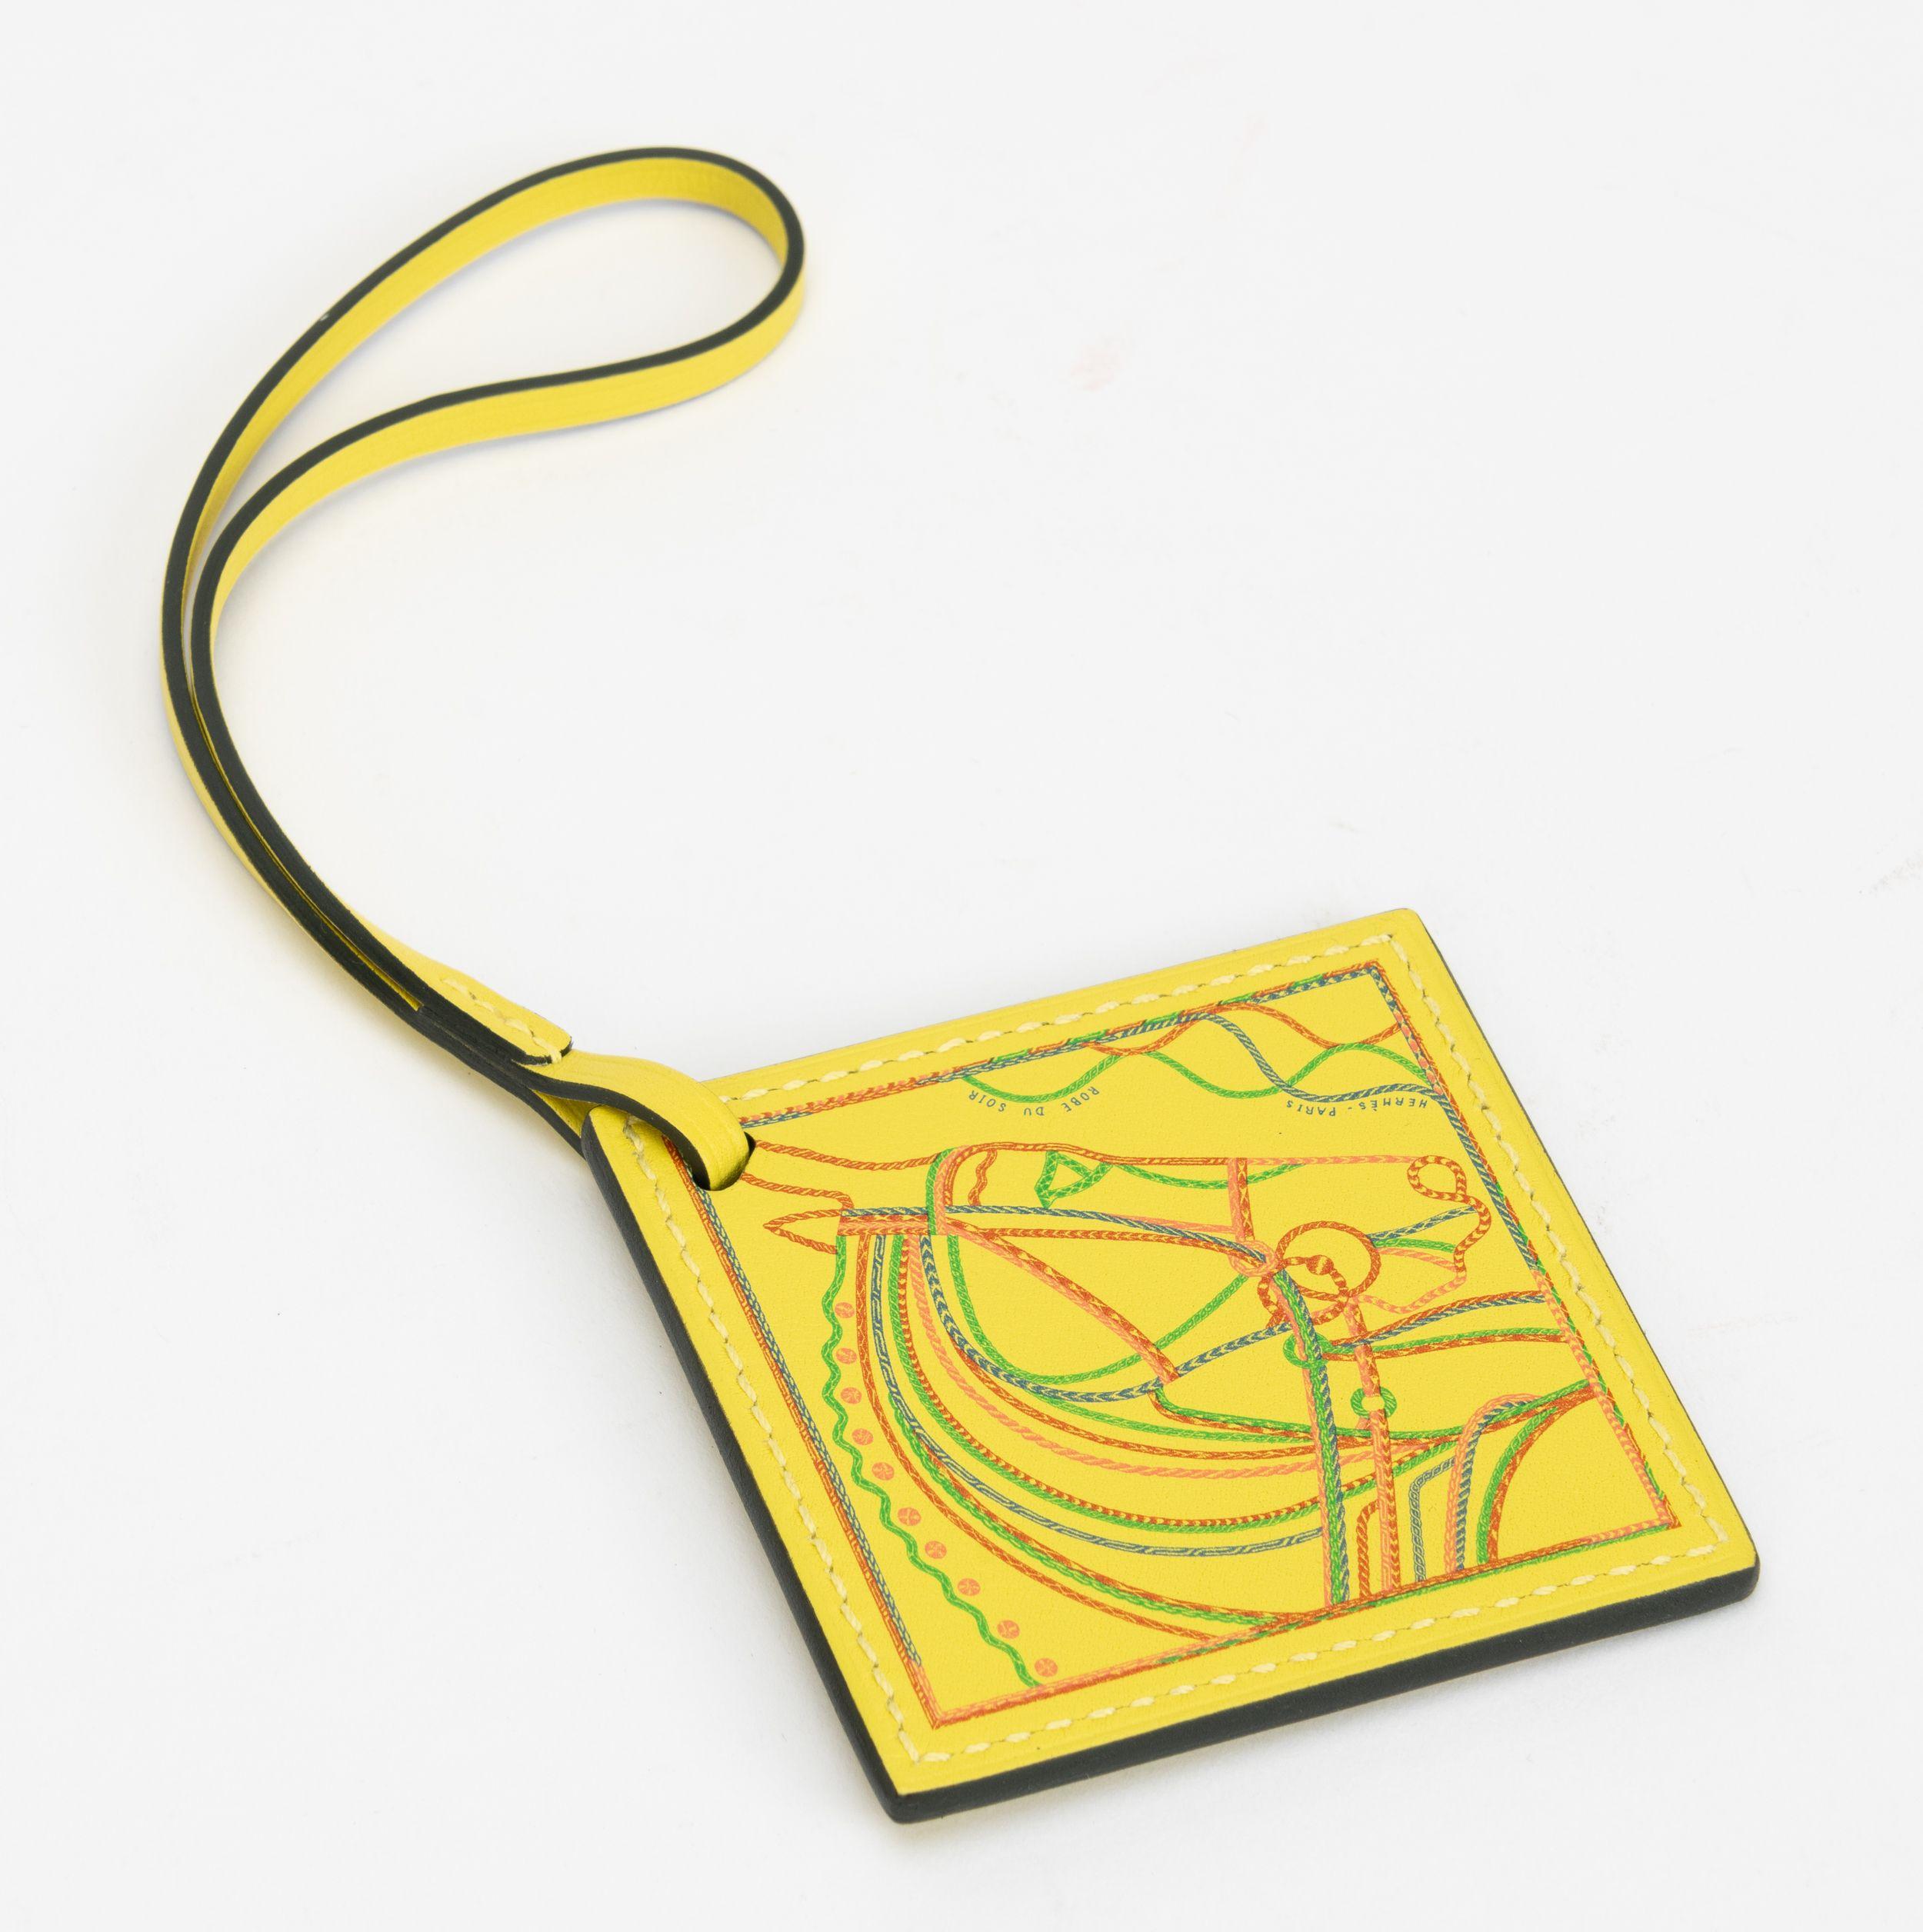 Hermès New Yellow Leather Bag Charm In New Condition For Sale In West Hollywood, CA